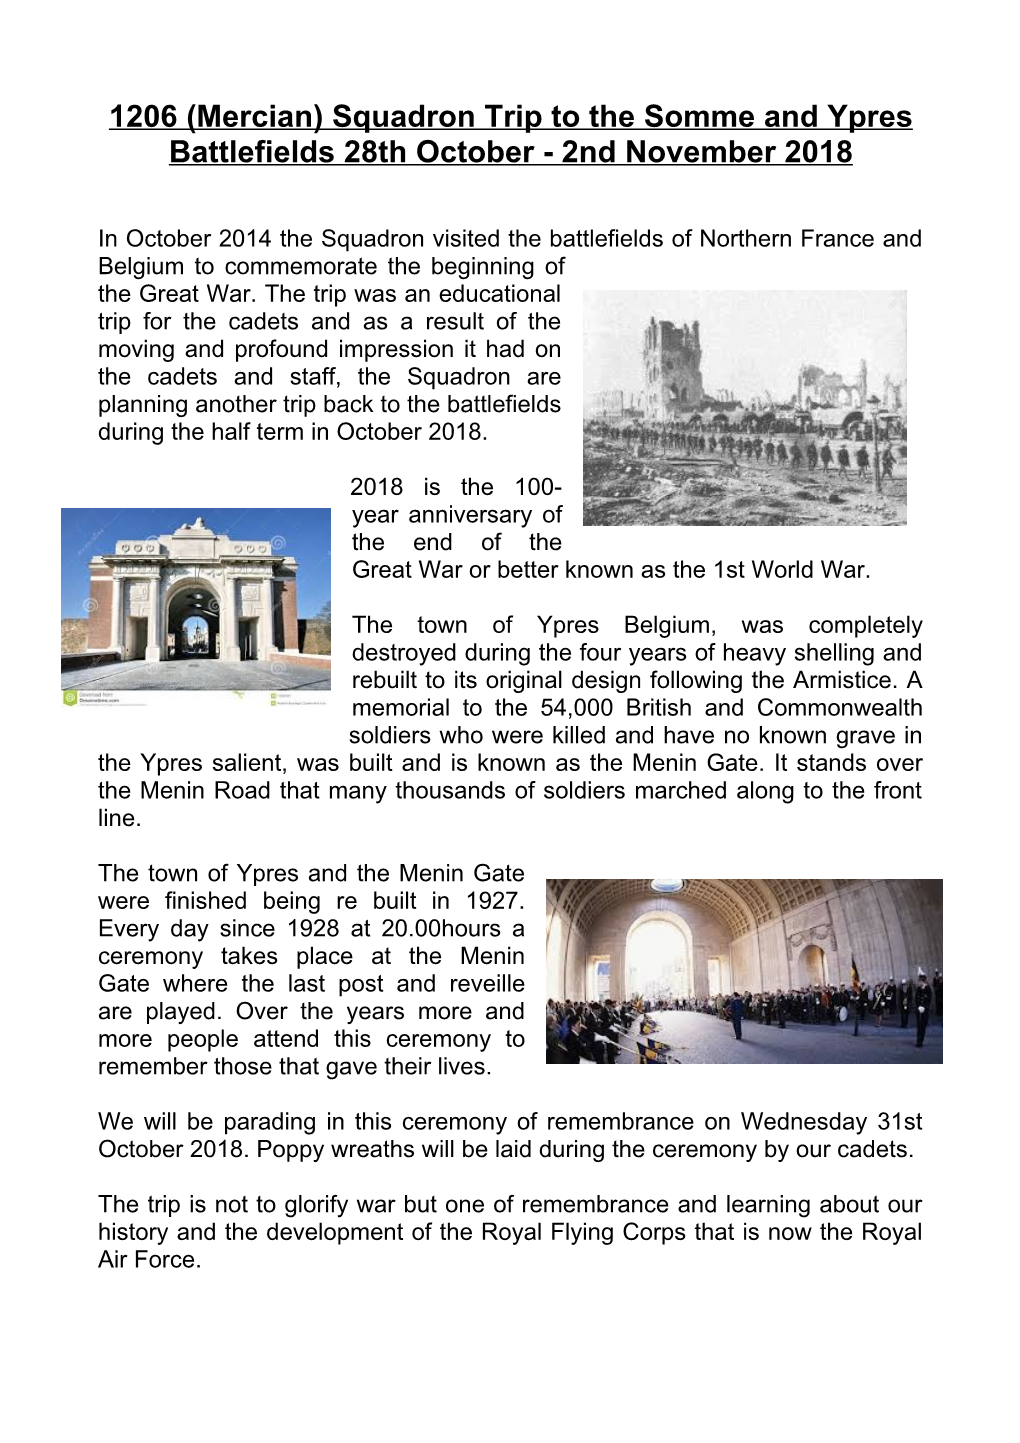 1206 (Mercian) Squadron Trip to the Somme and Ypres Battlefields 28Th October - 2Nd November